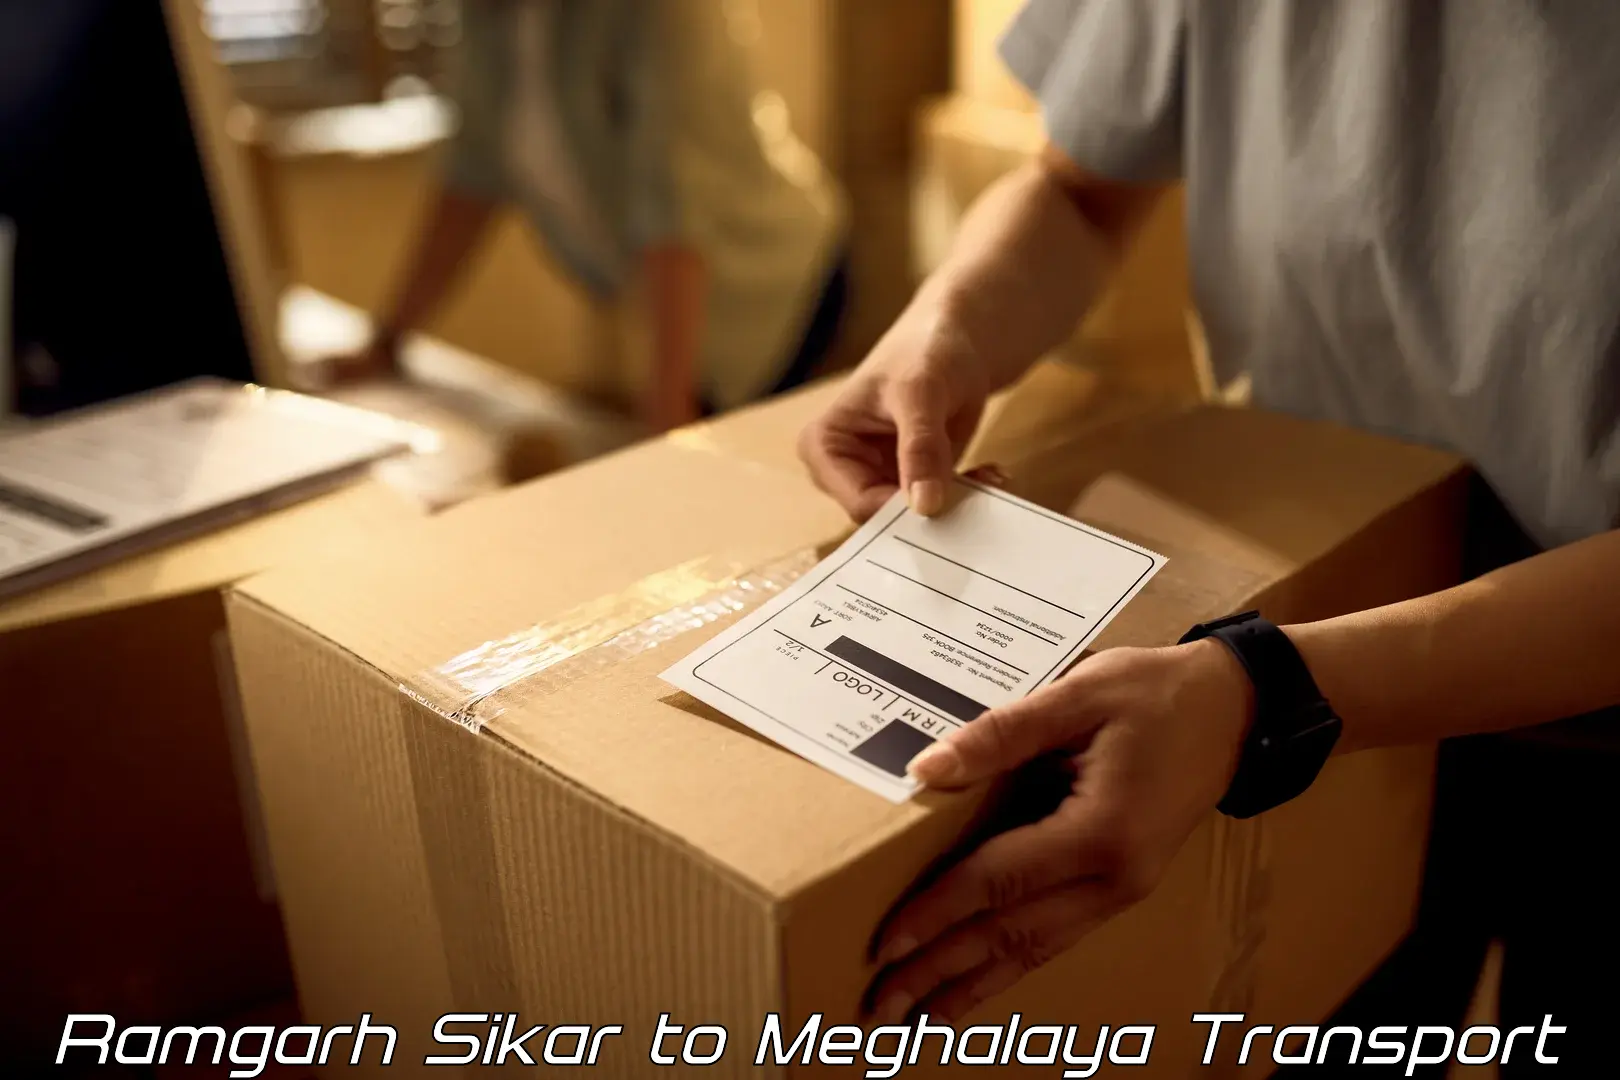 Container transport service Ramgarh Sikar to Shillong